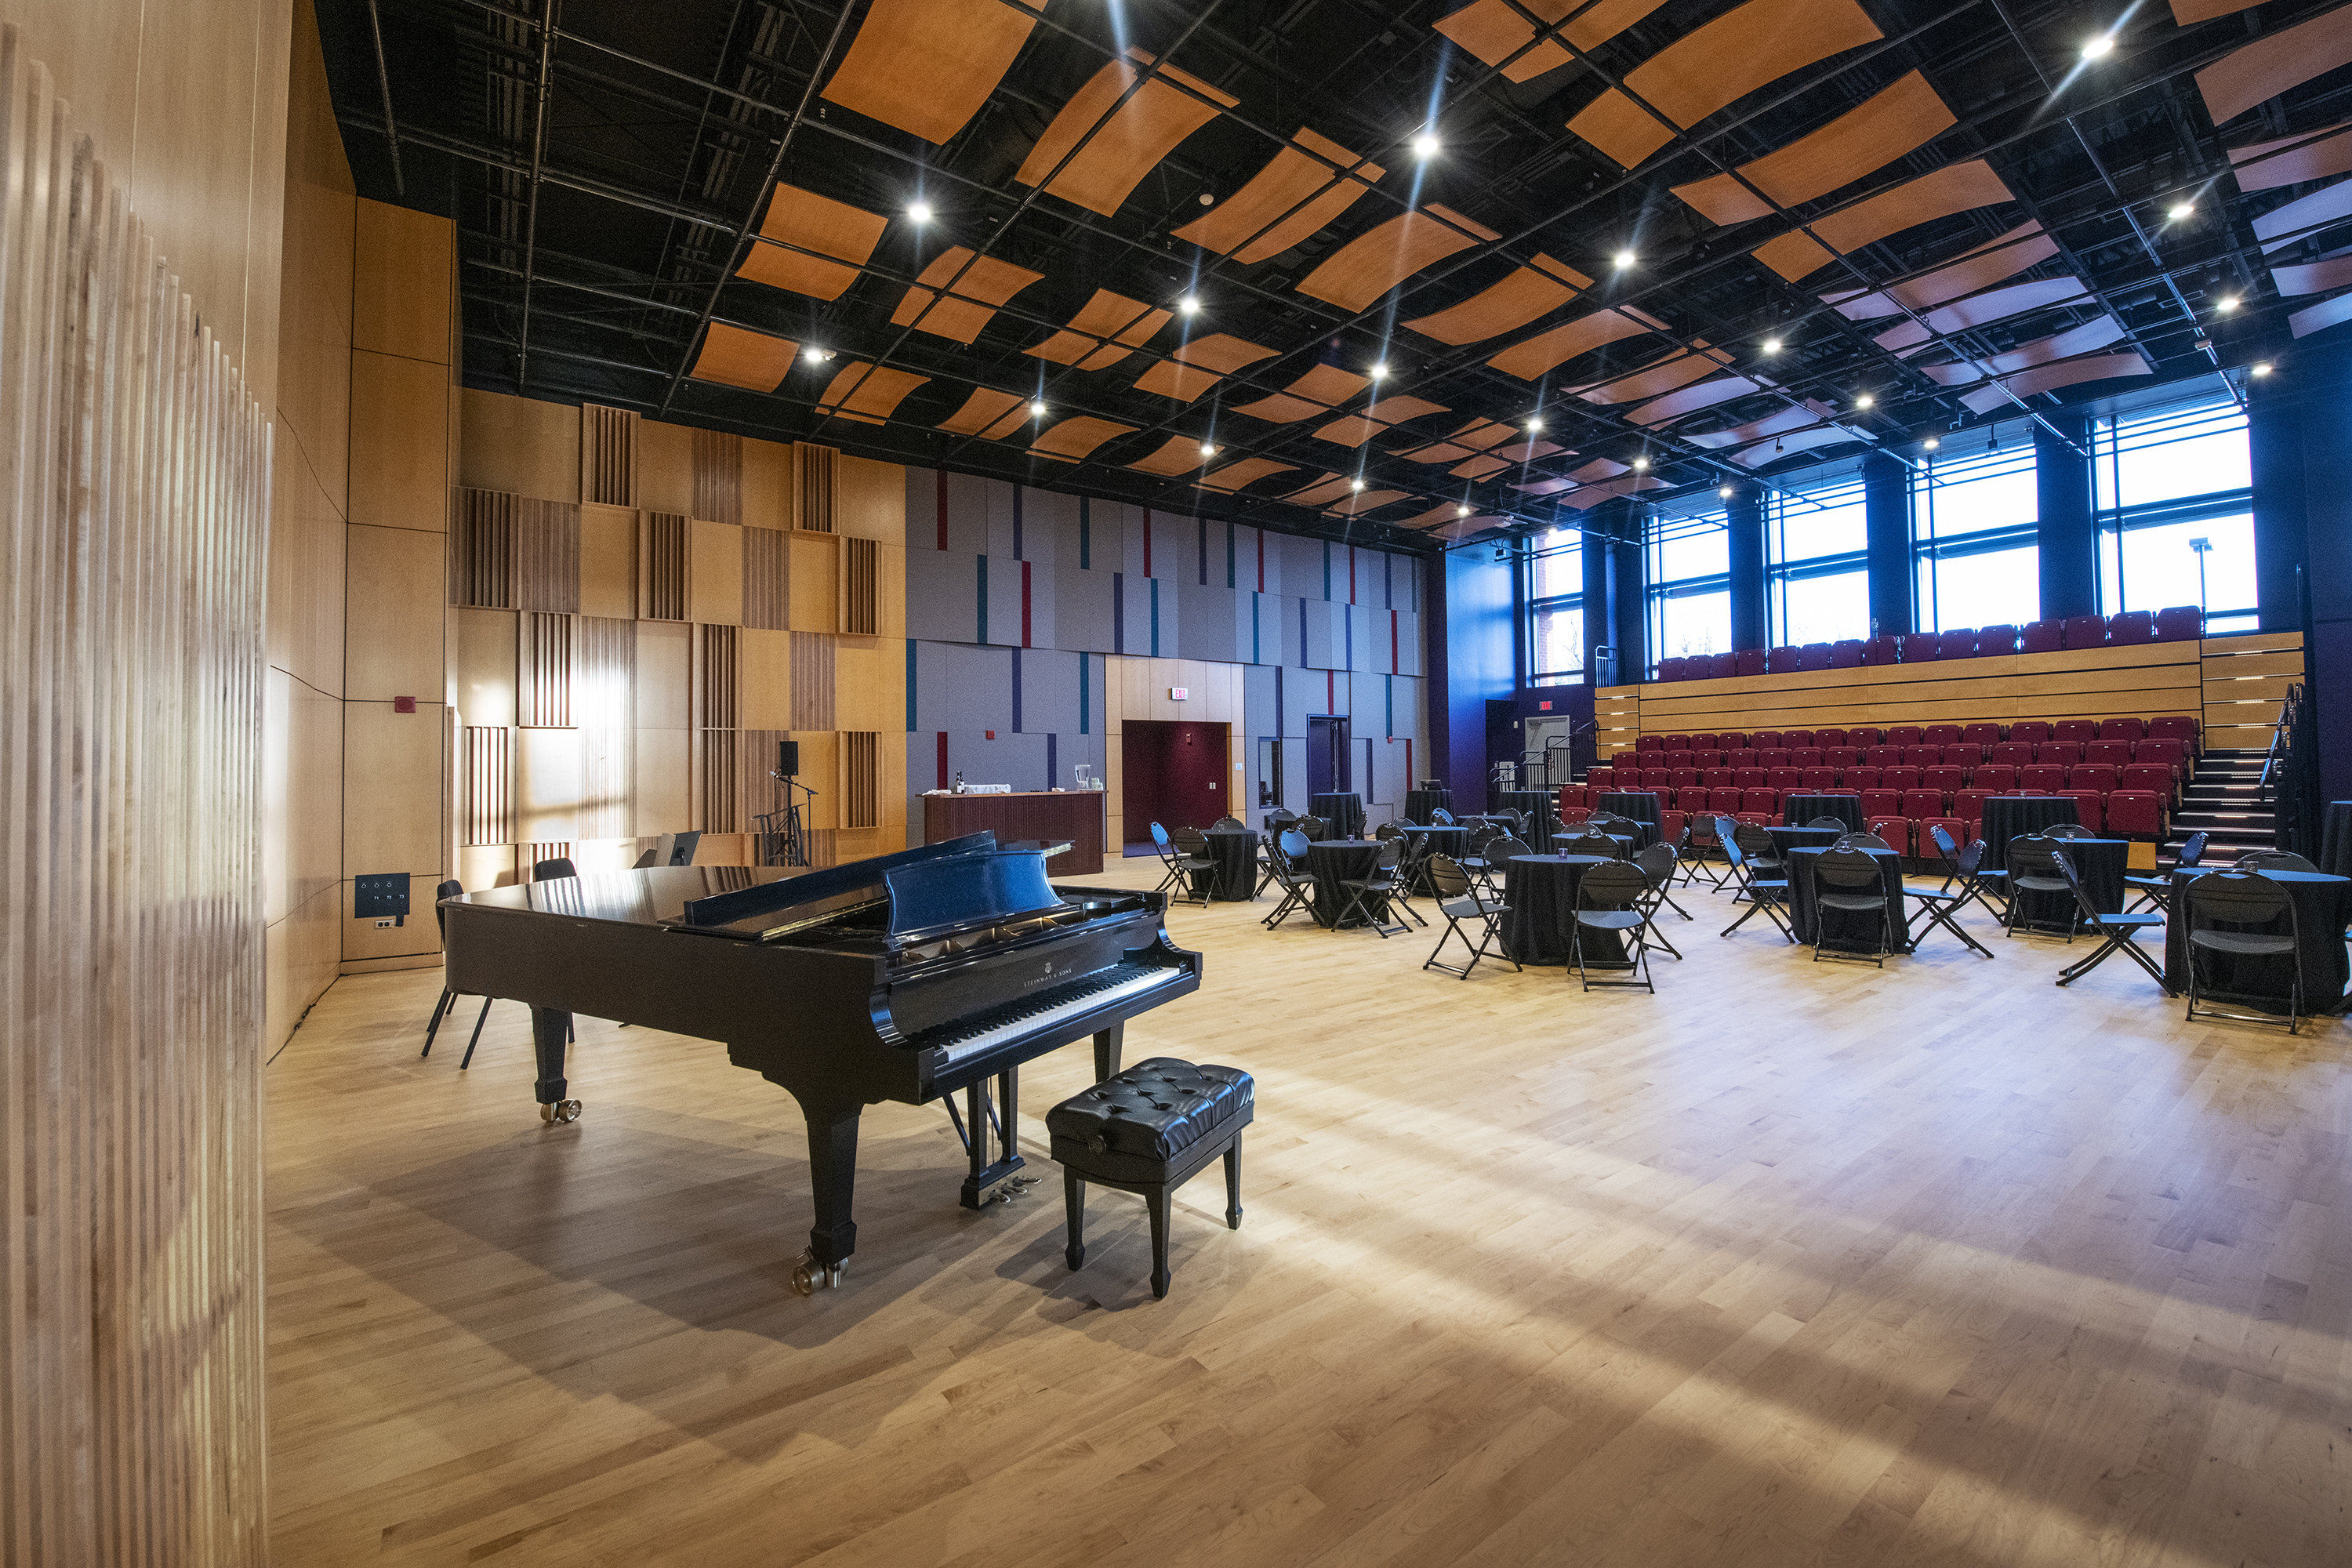 The large rehearsal hall in the new Education and Rehearsal wing.